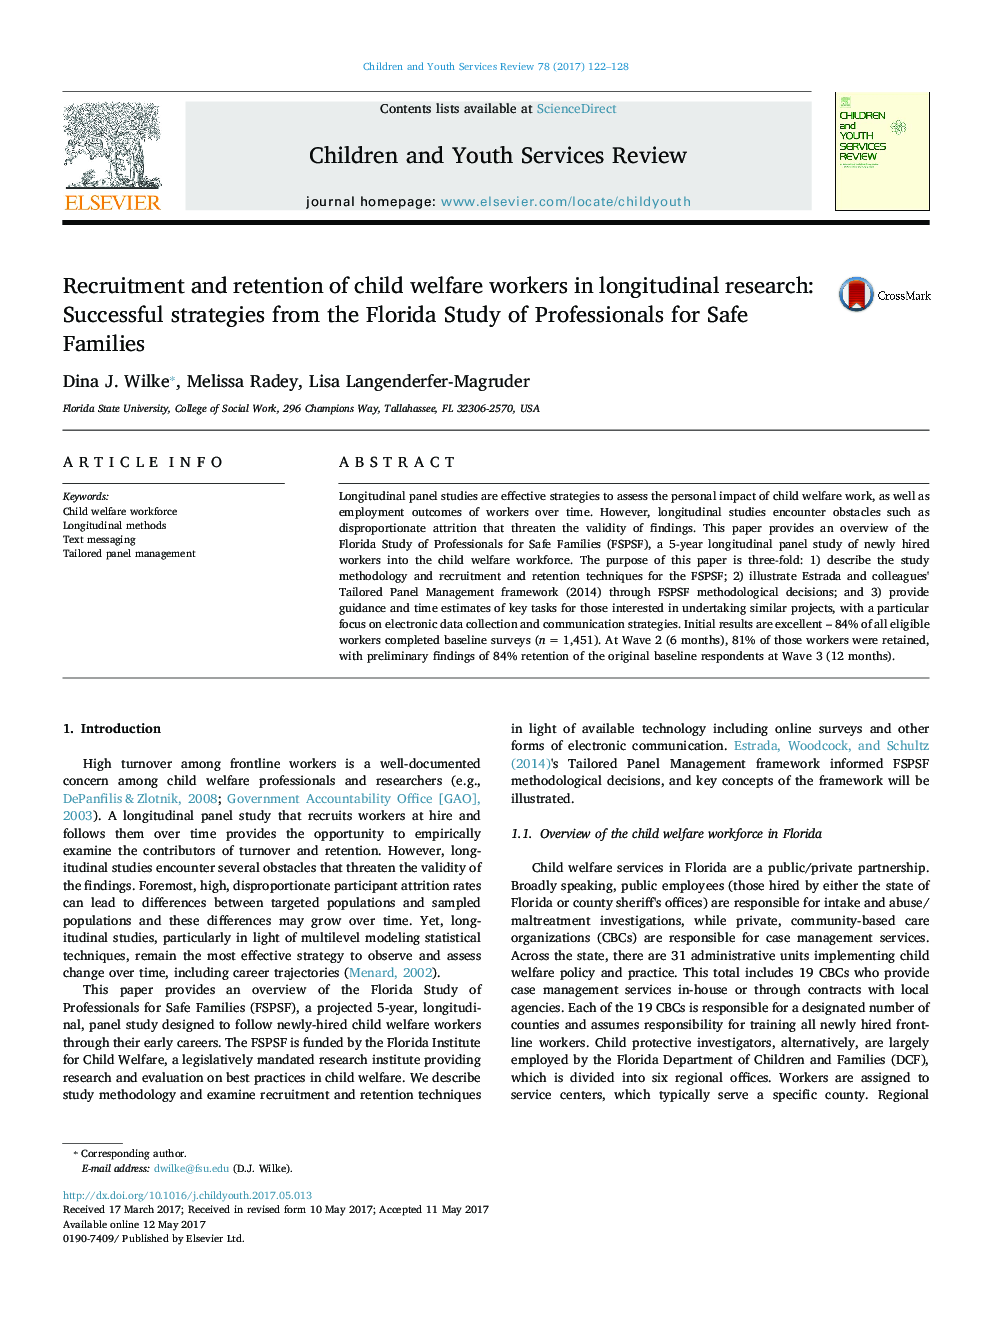 Recruitment and retention of child welfare workers in longitudinal research: Successful strategies from the Florida Study of Professionals for Safe Families